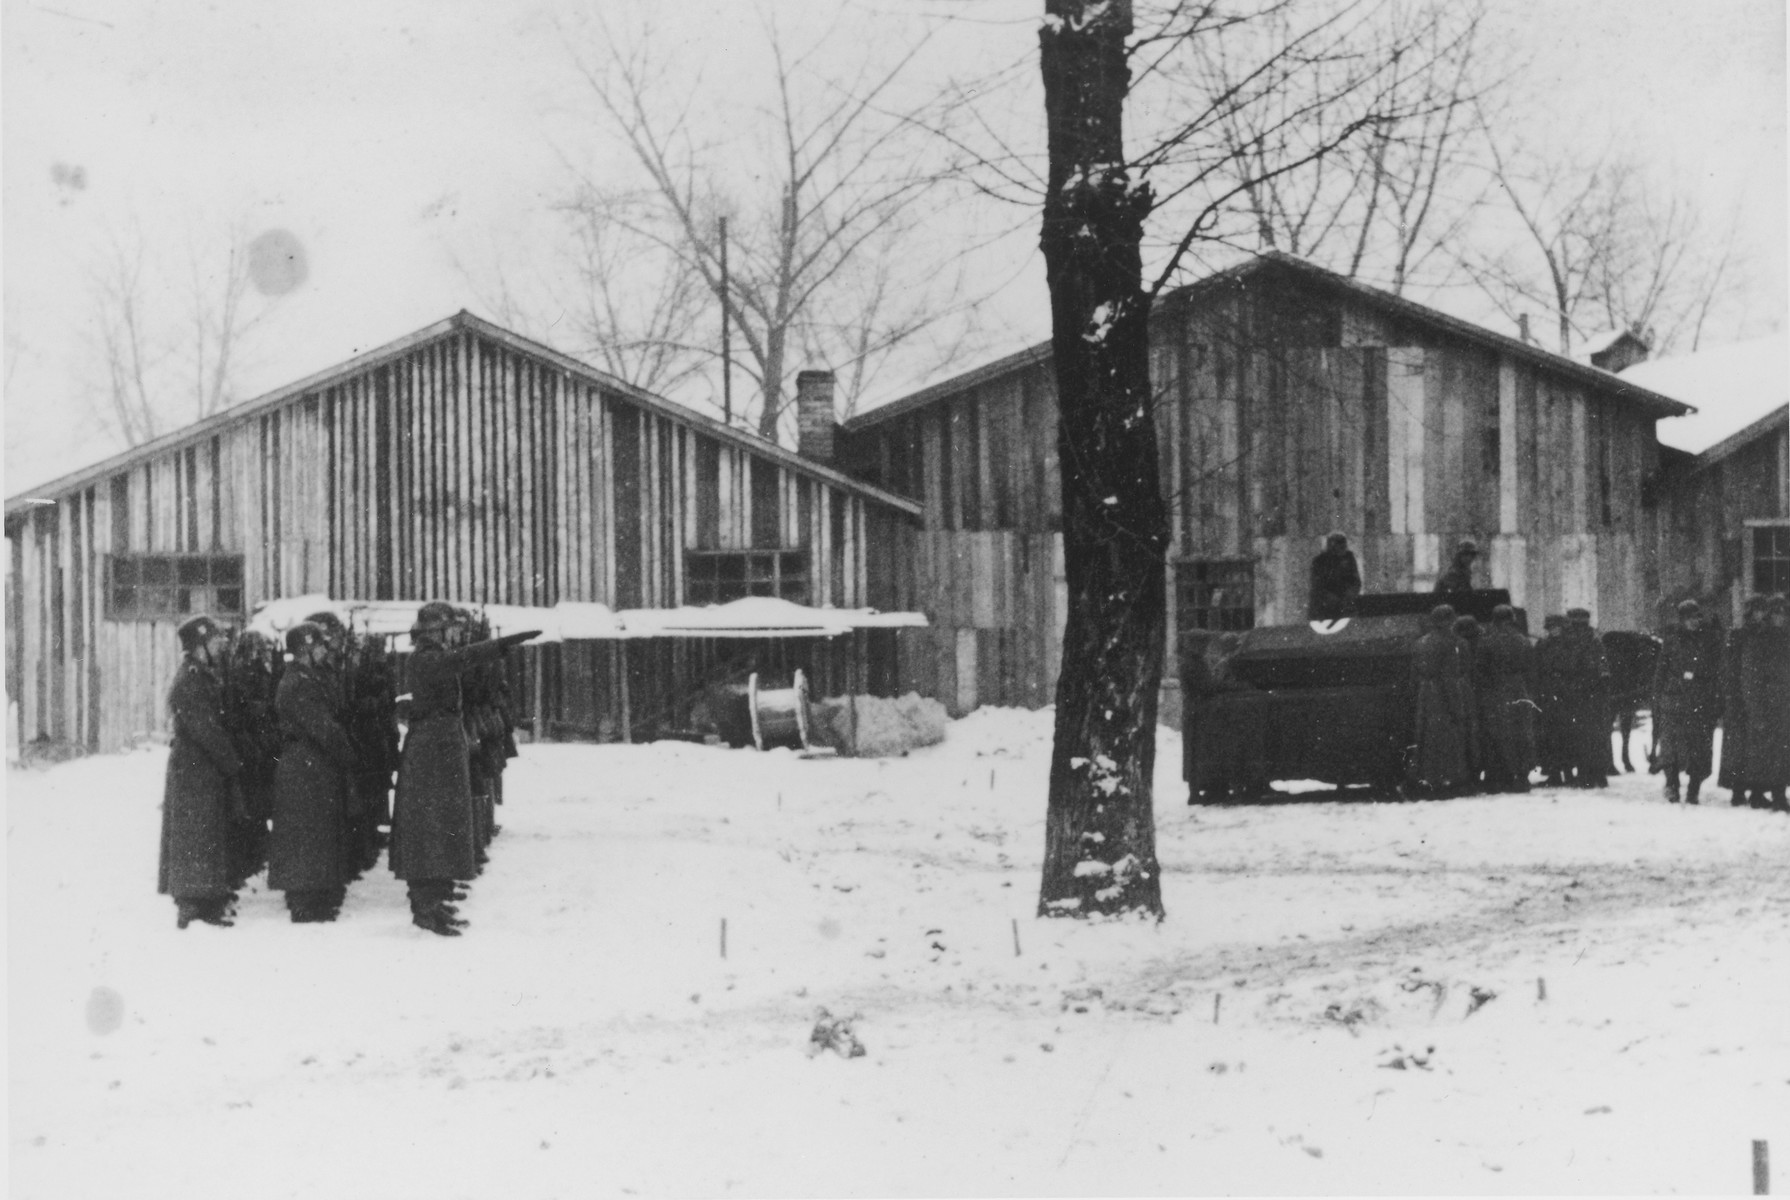 Three rows of German soldiers stand at attention and salute during a military funeral in Auschwitz.

The original caption reads "Beisetzung von SS Kameraden nach einem Terrorangriff."  (Burying our SS comrades from a terror attack.)

[This probably is the aftermath of the December 26 bombing based on the snow on the ground but it could also be September 13th bombing of IG Farben in which 15 SS men died in the SS residential blocks and 28 were seriously wounded.]